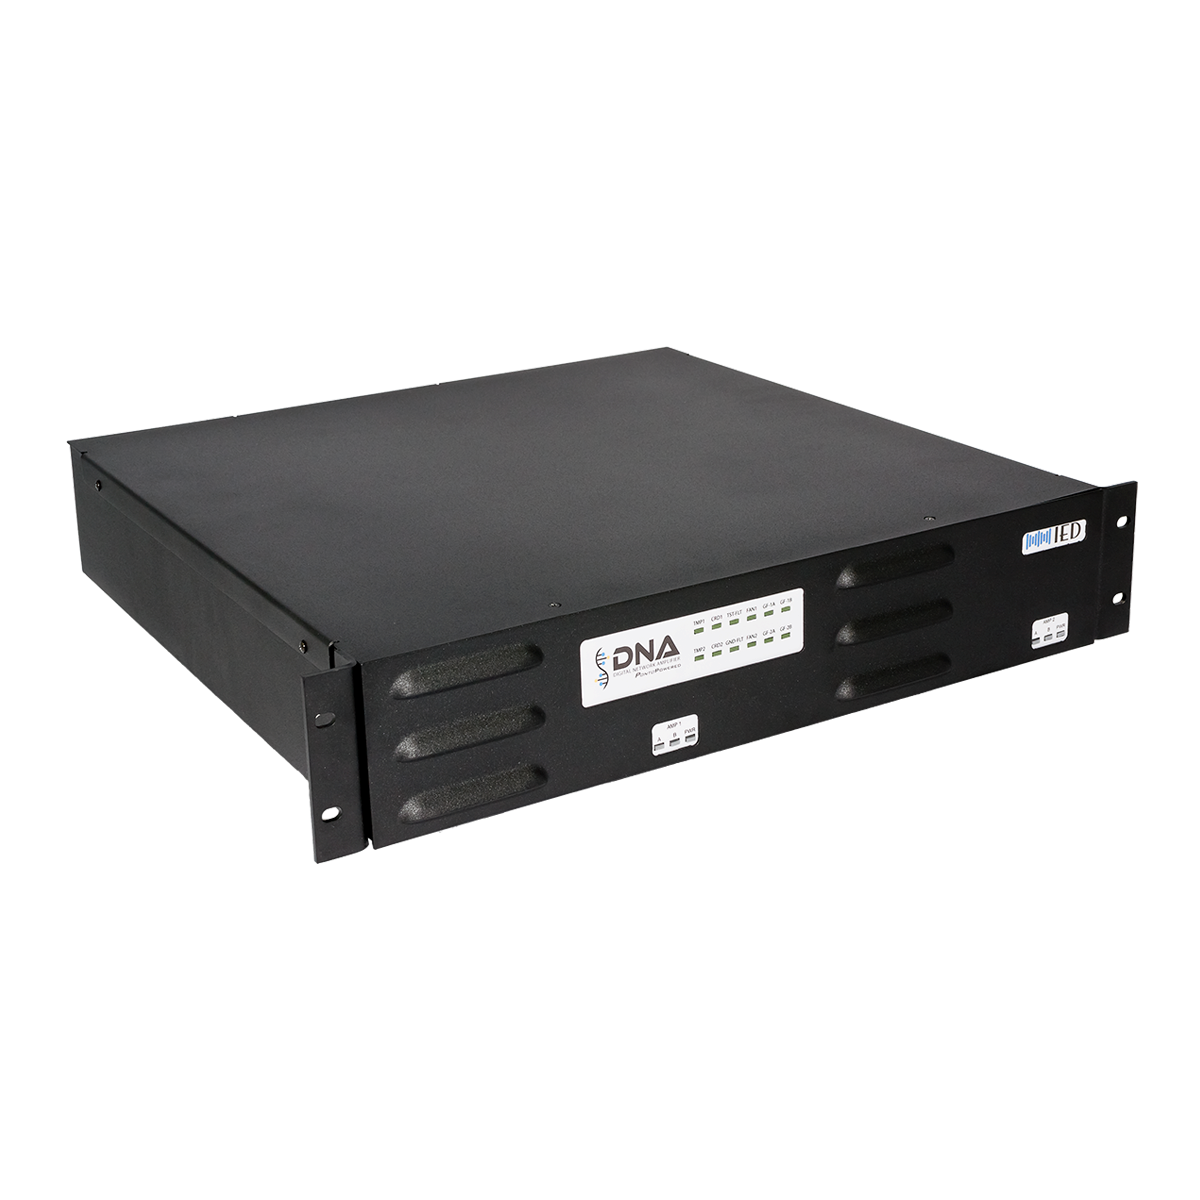 Atlas IED DNA2404CL Digital network 4ch power amplifier with CobraNet interface